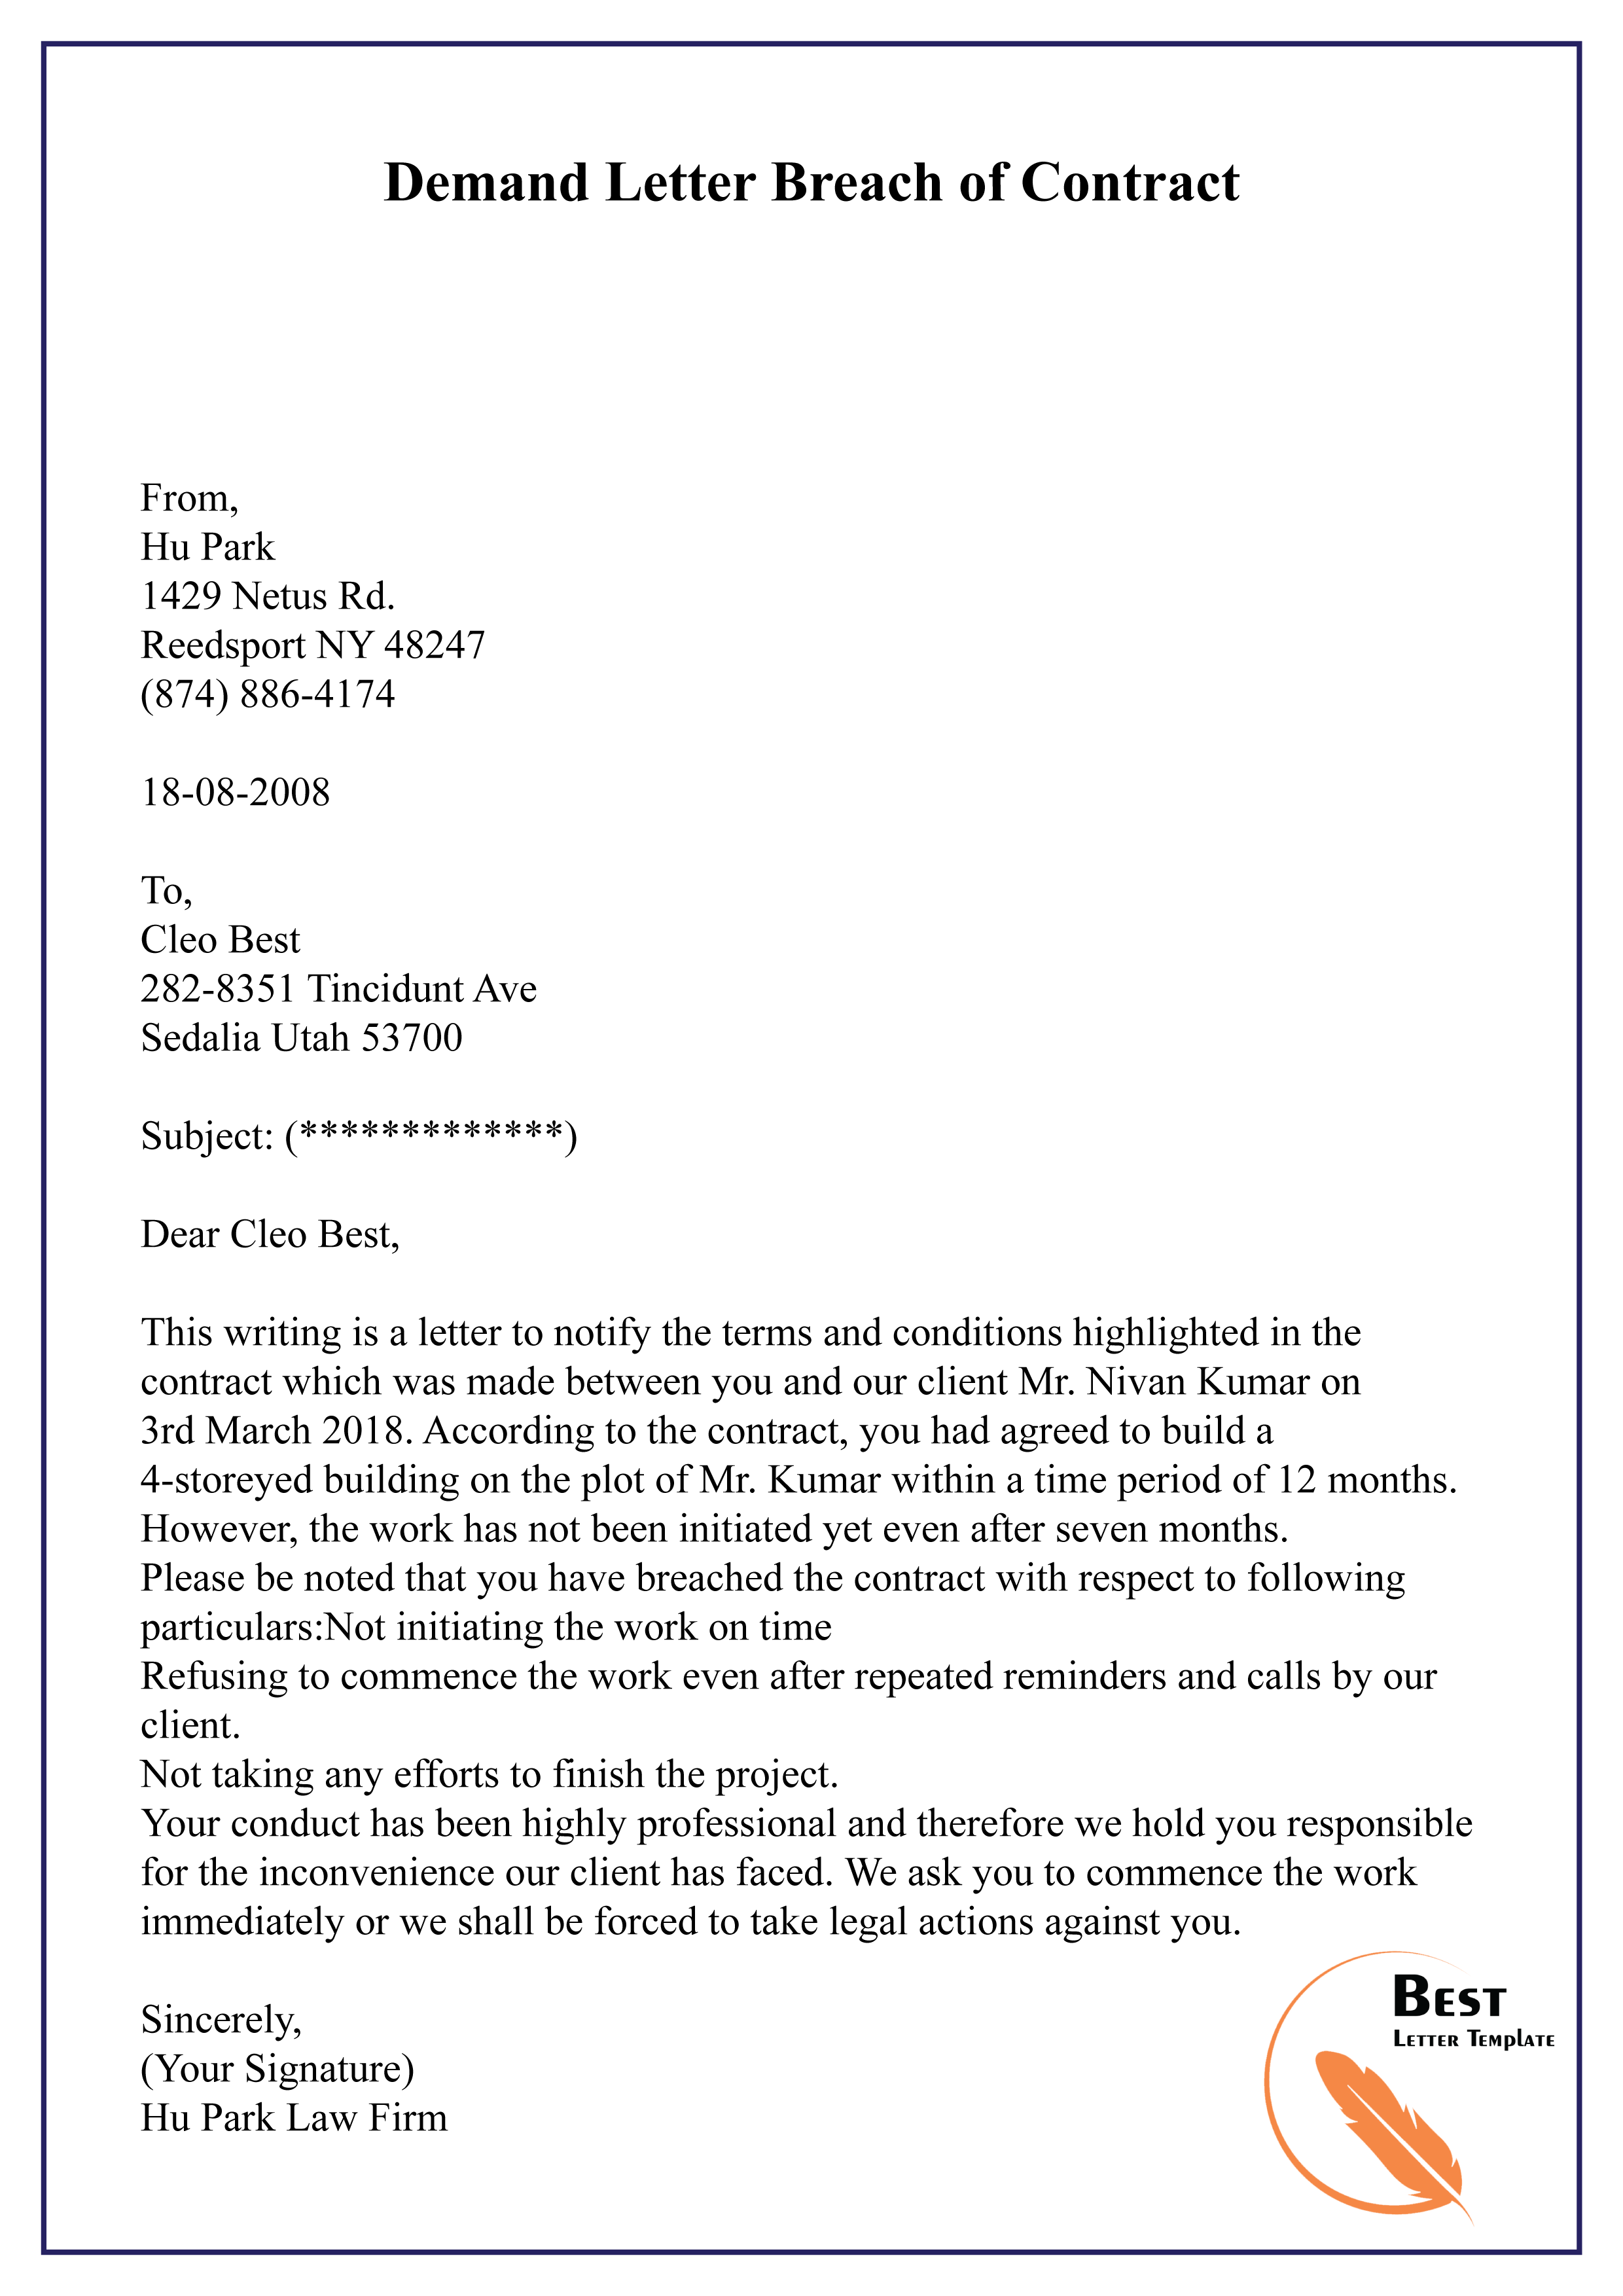 Demand Letter For Breach Of Contract